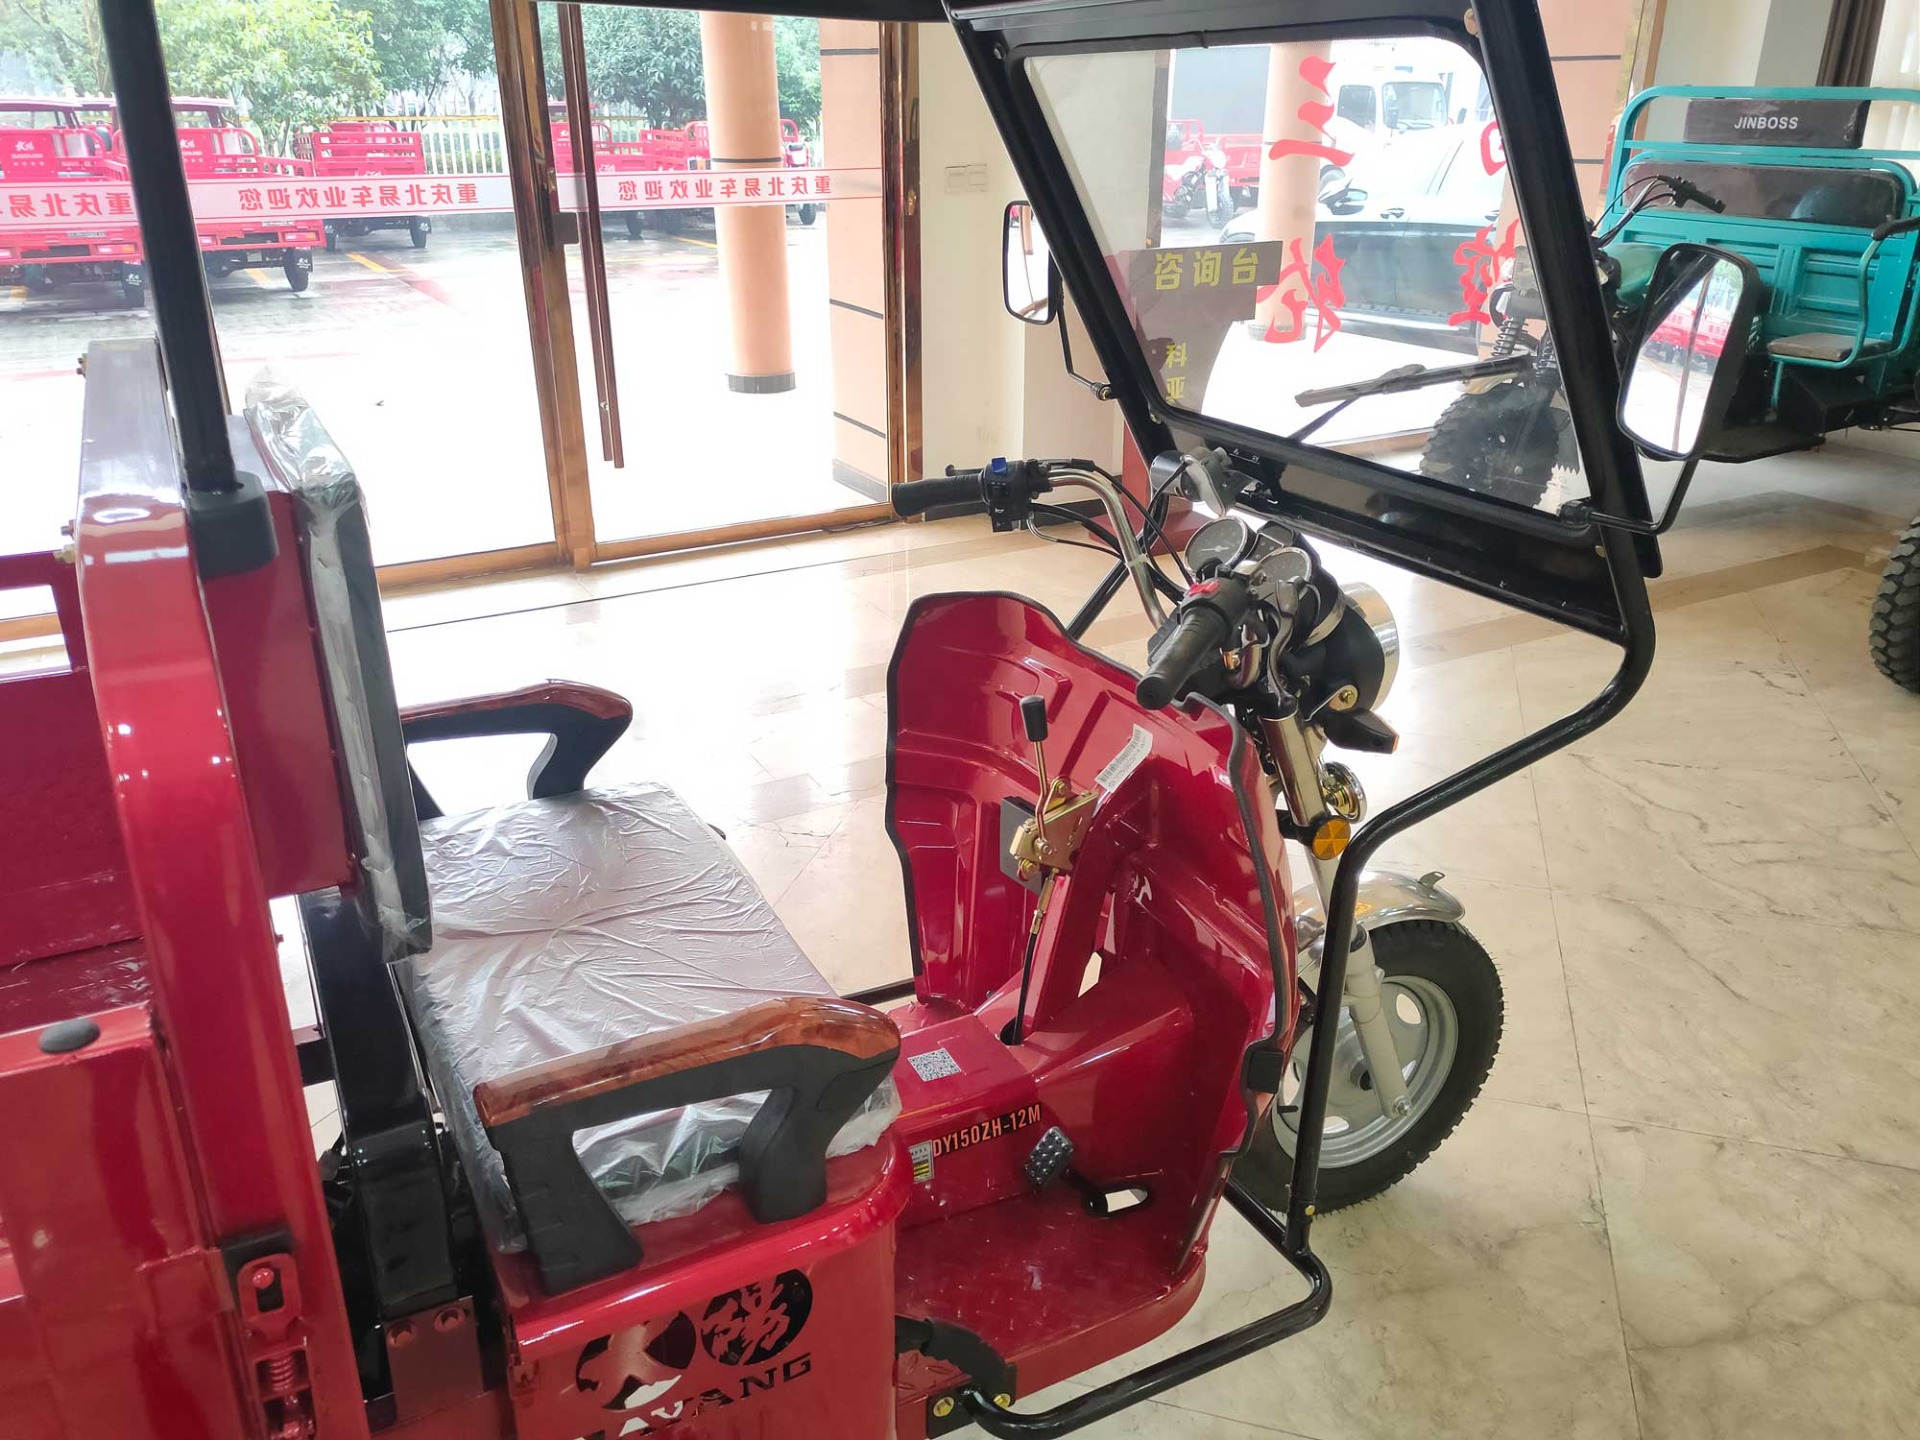 DY-C3 3 Wheeler Motor Tricycle 150CC